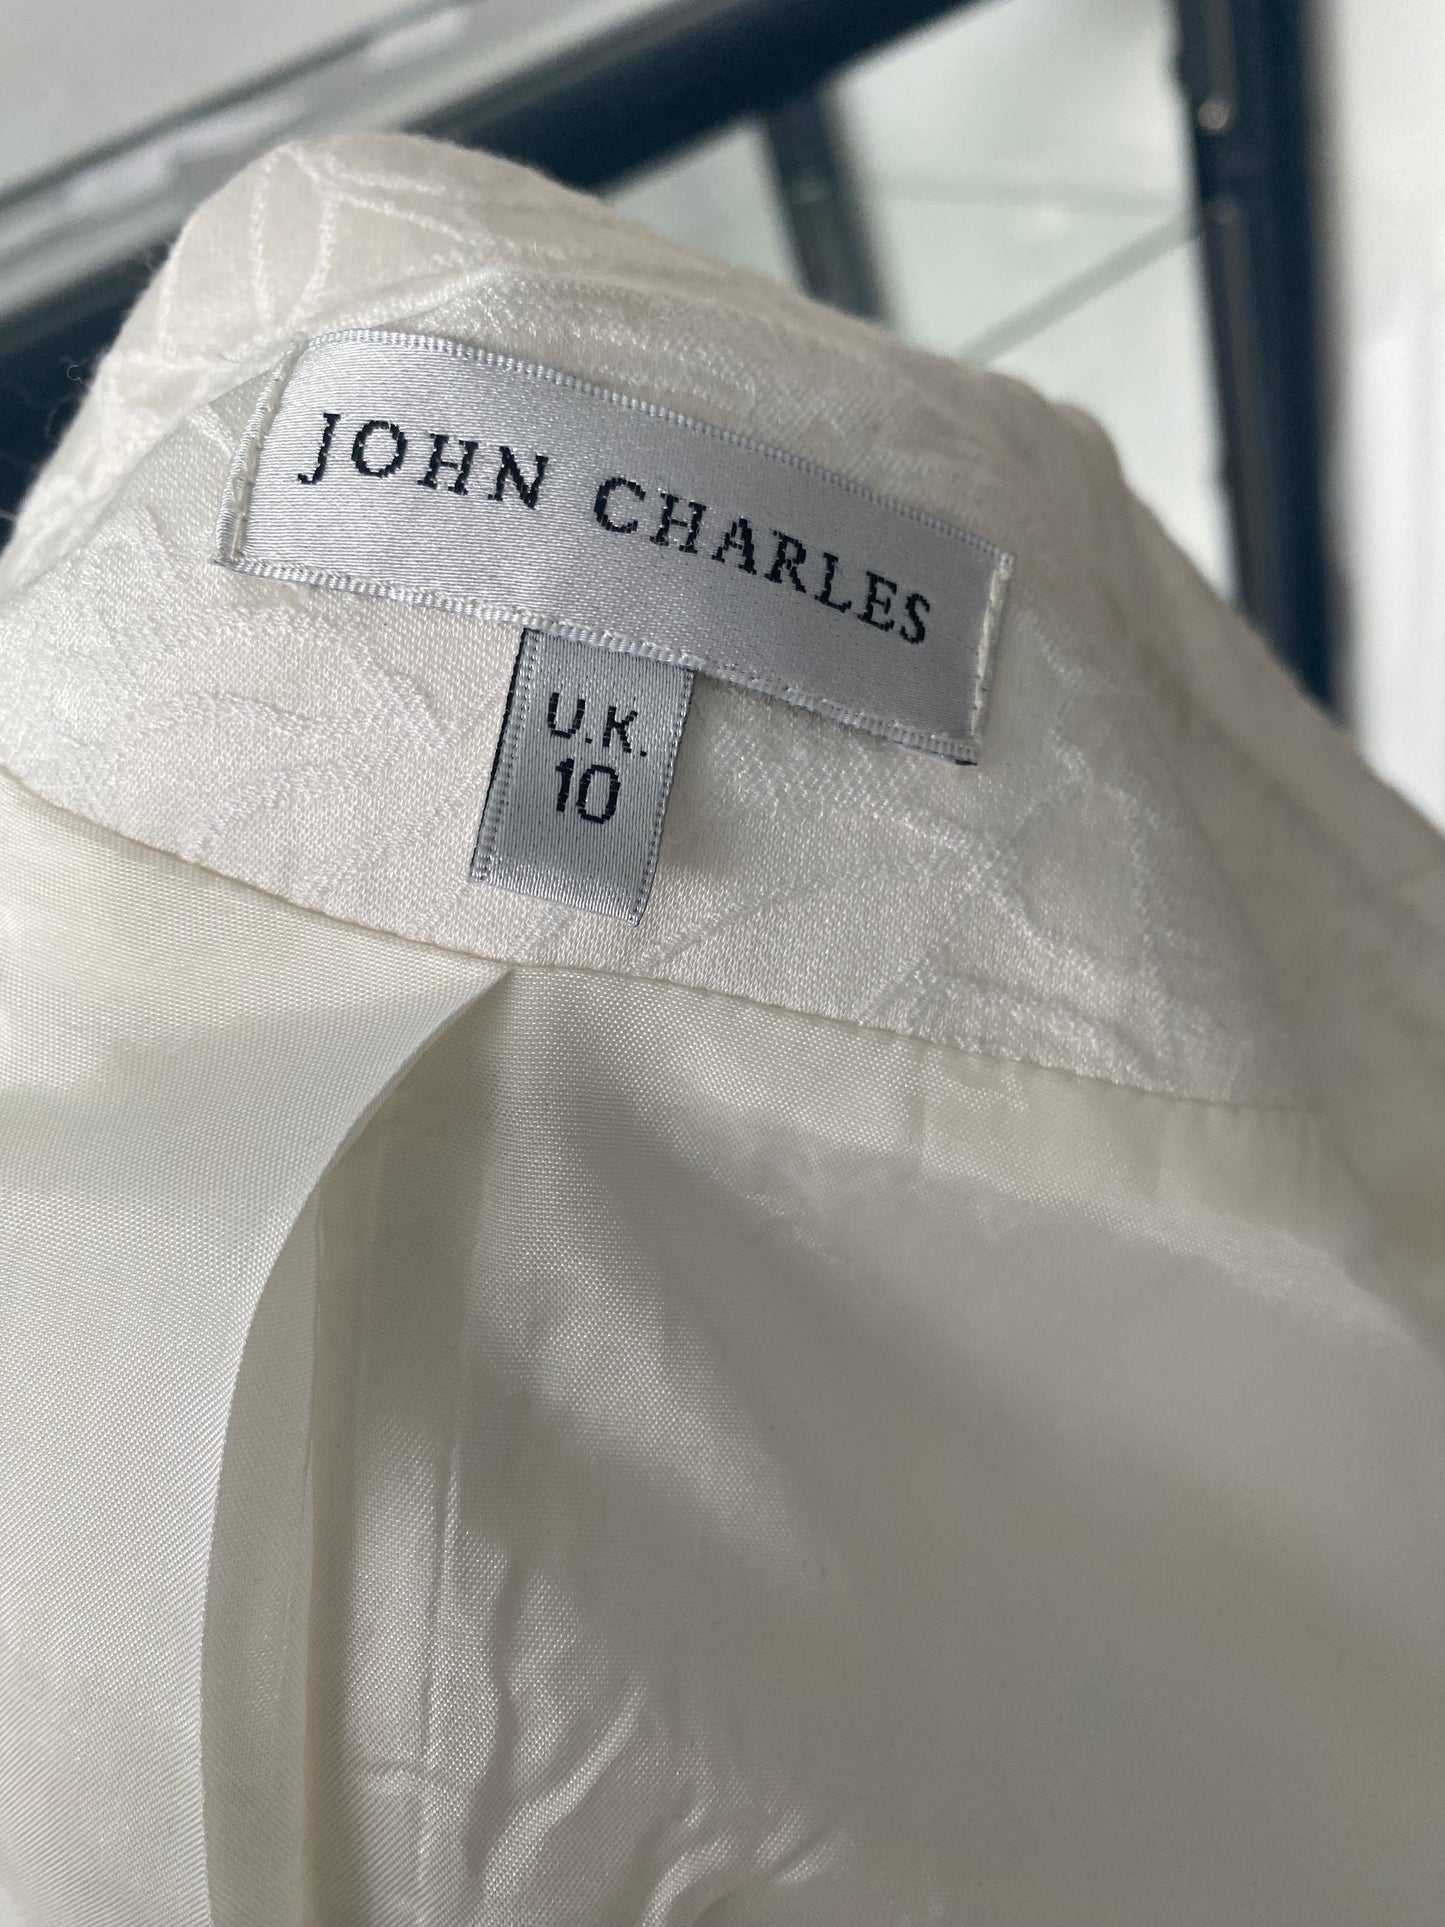 John Charles Dress and Jacket Suit Size 10